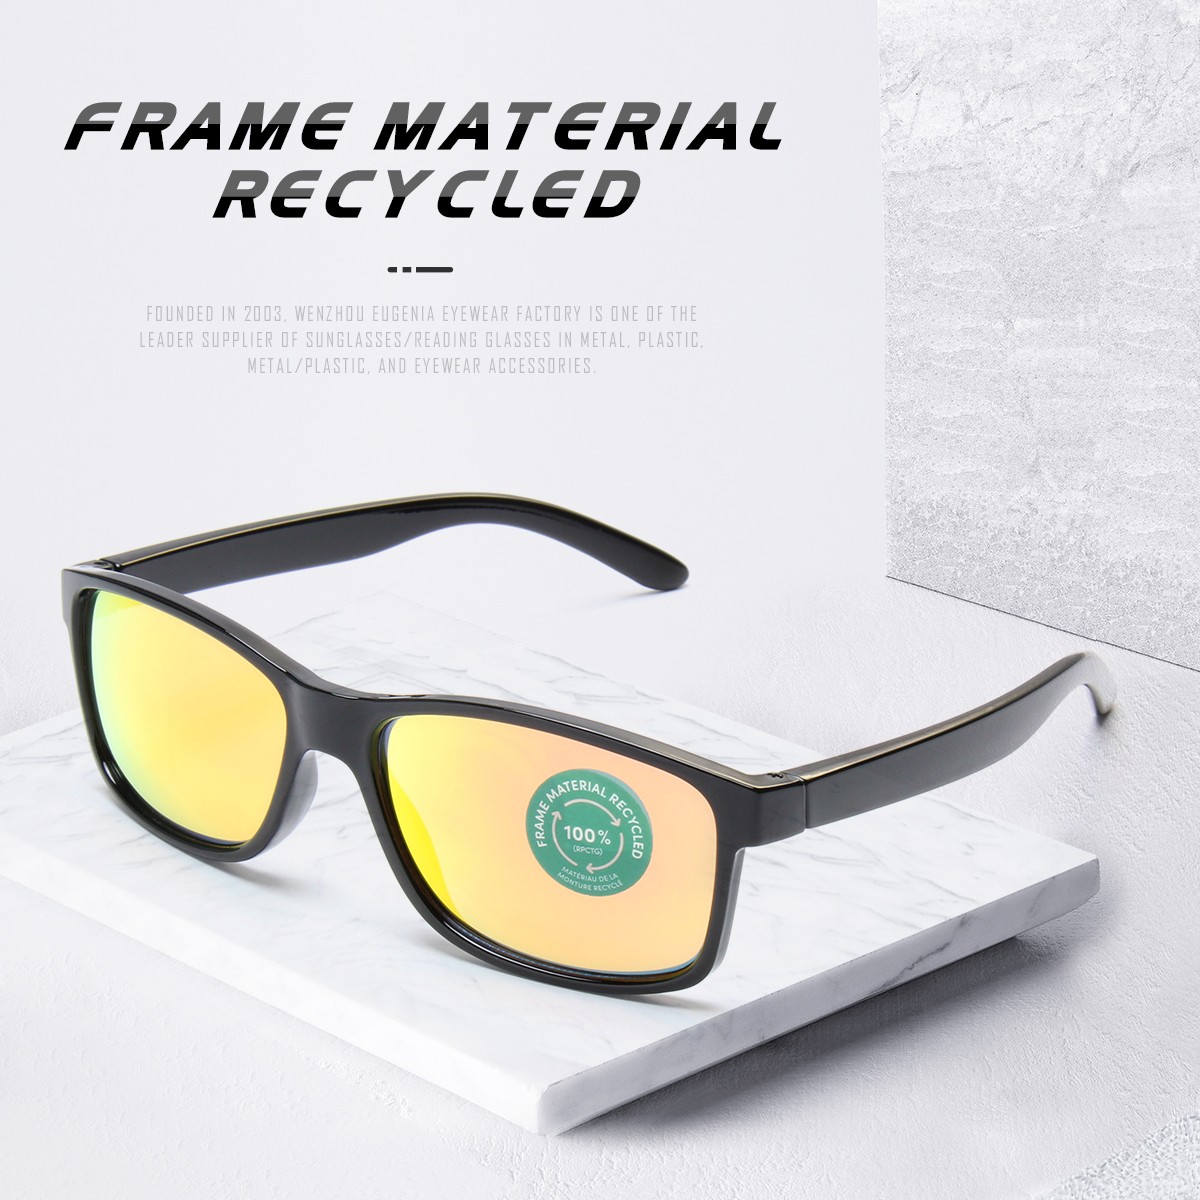 worldwide recycled sunglasses factory direct supply for Decoration-1